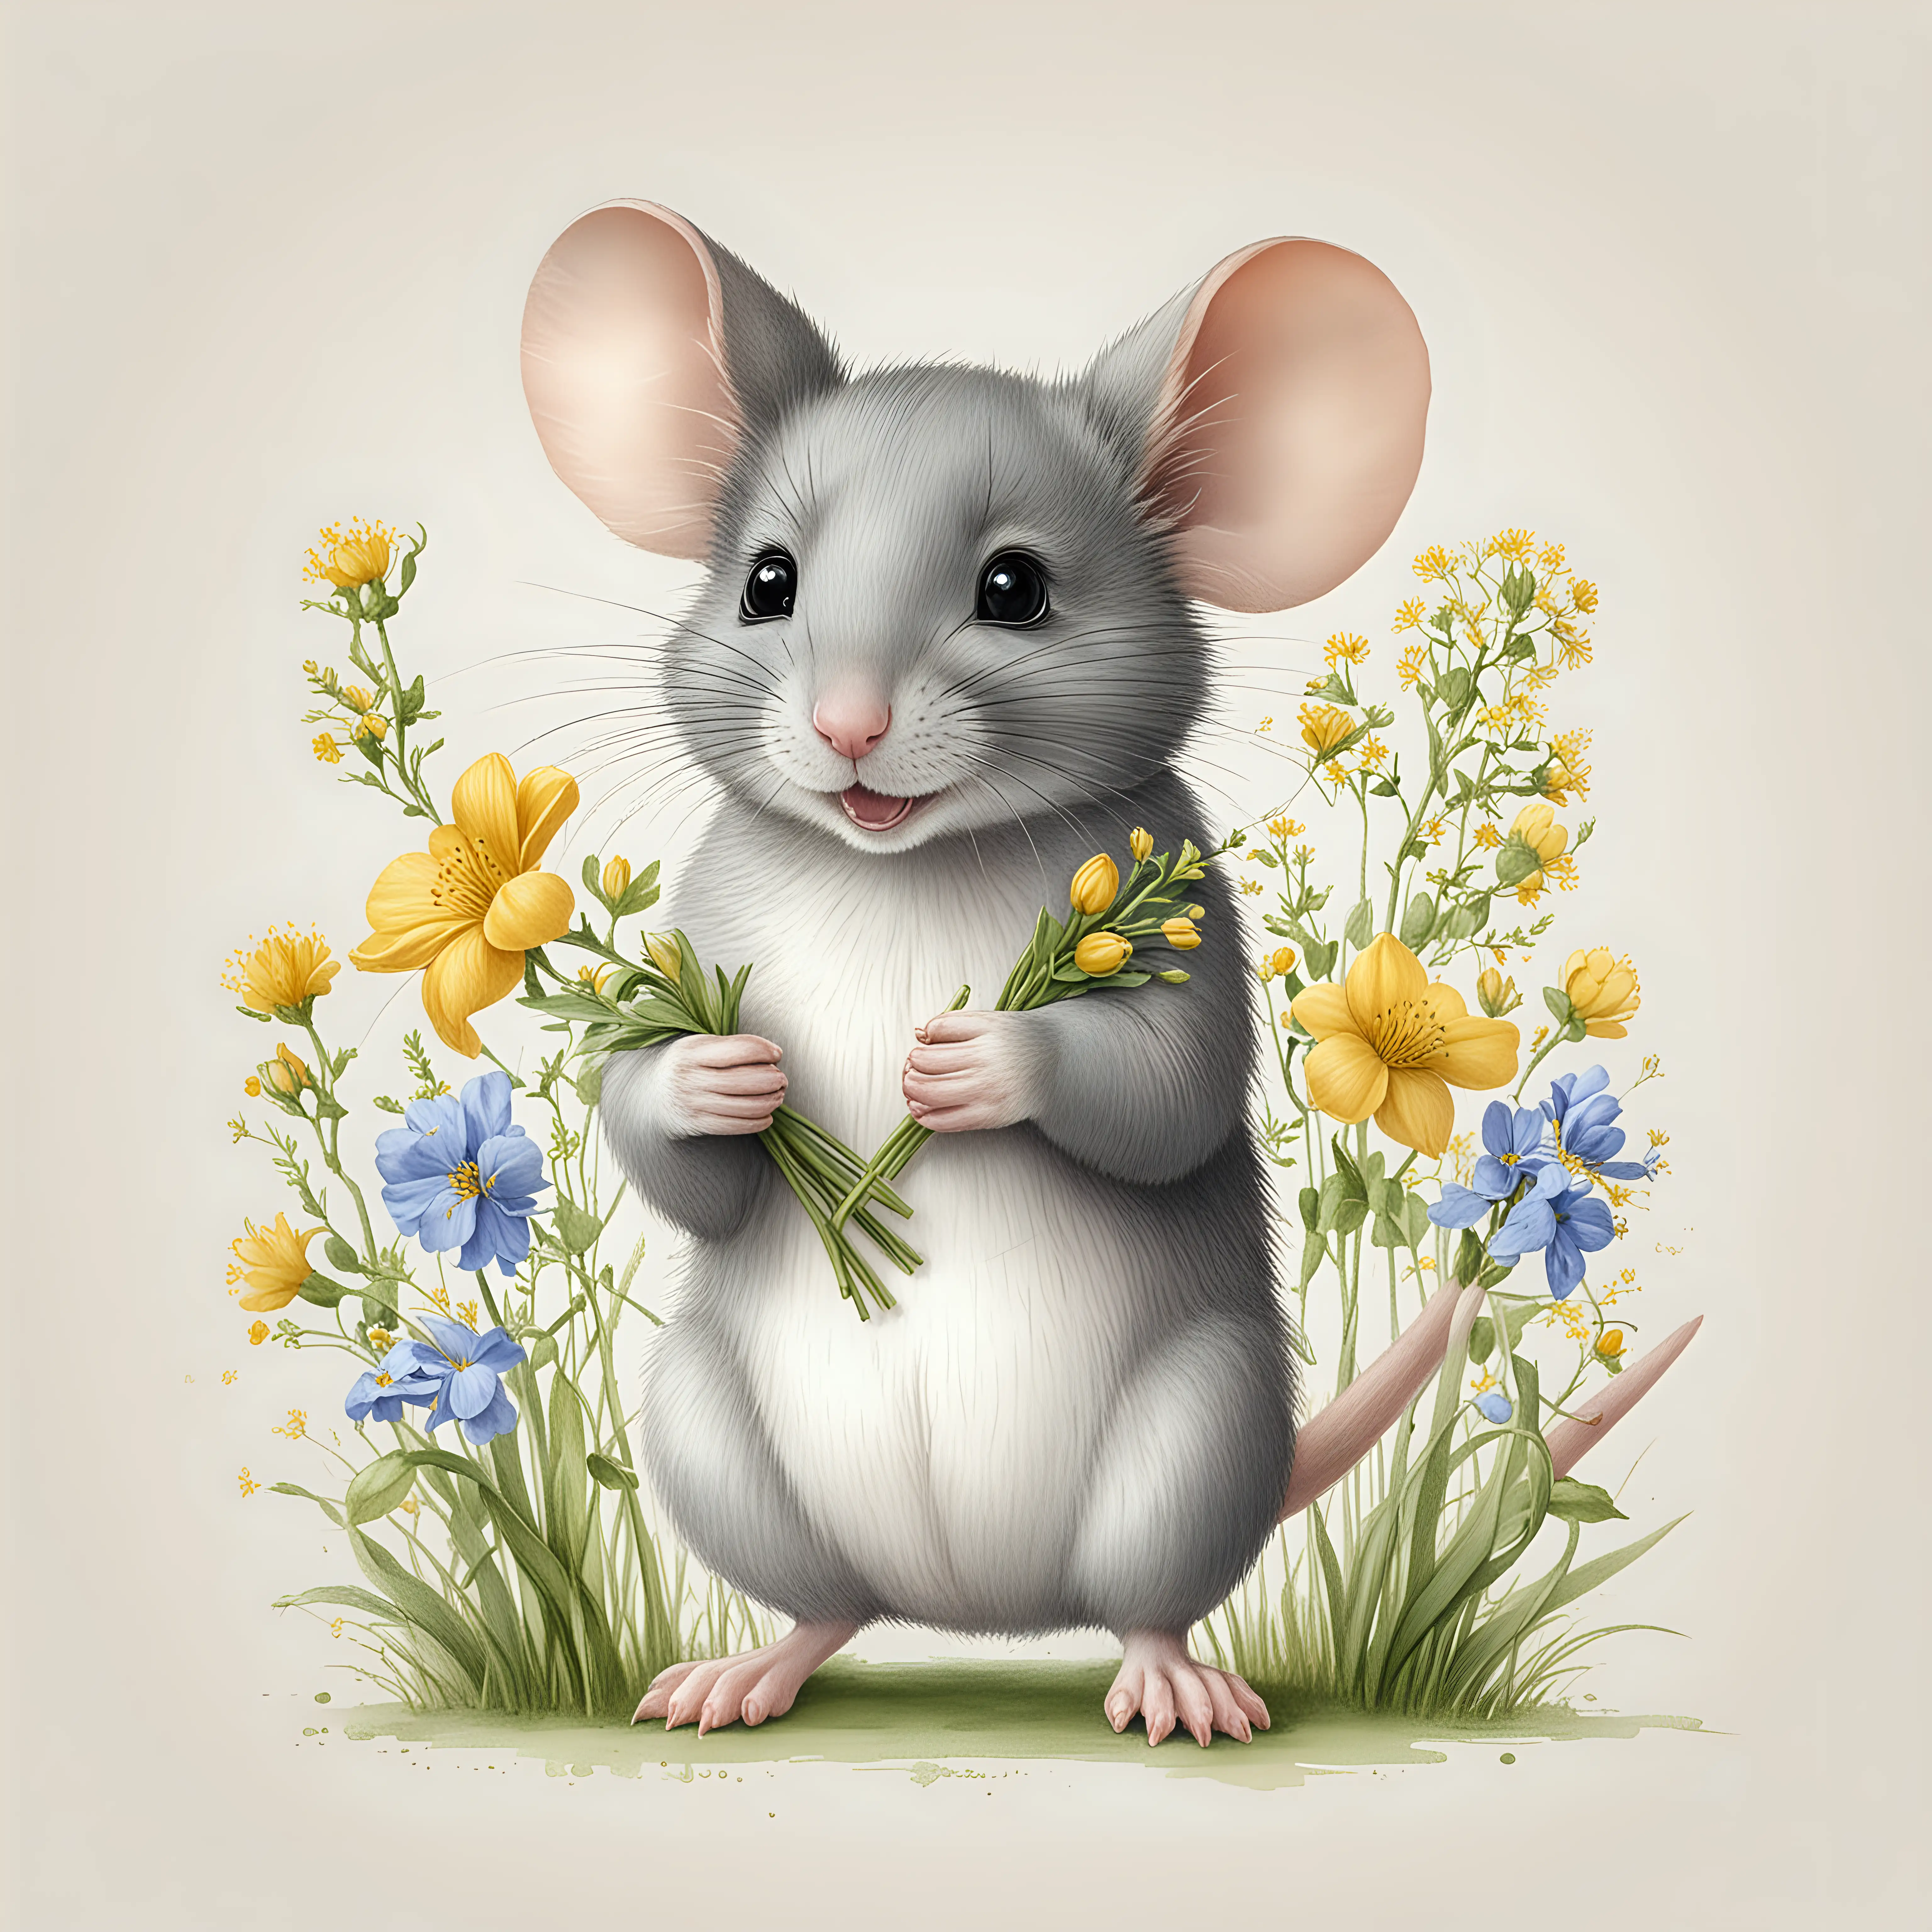 Cute pencil drawing of a mouse holding spring flowers, isolated on a white background, suitable for clip art